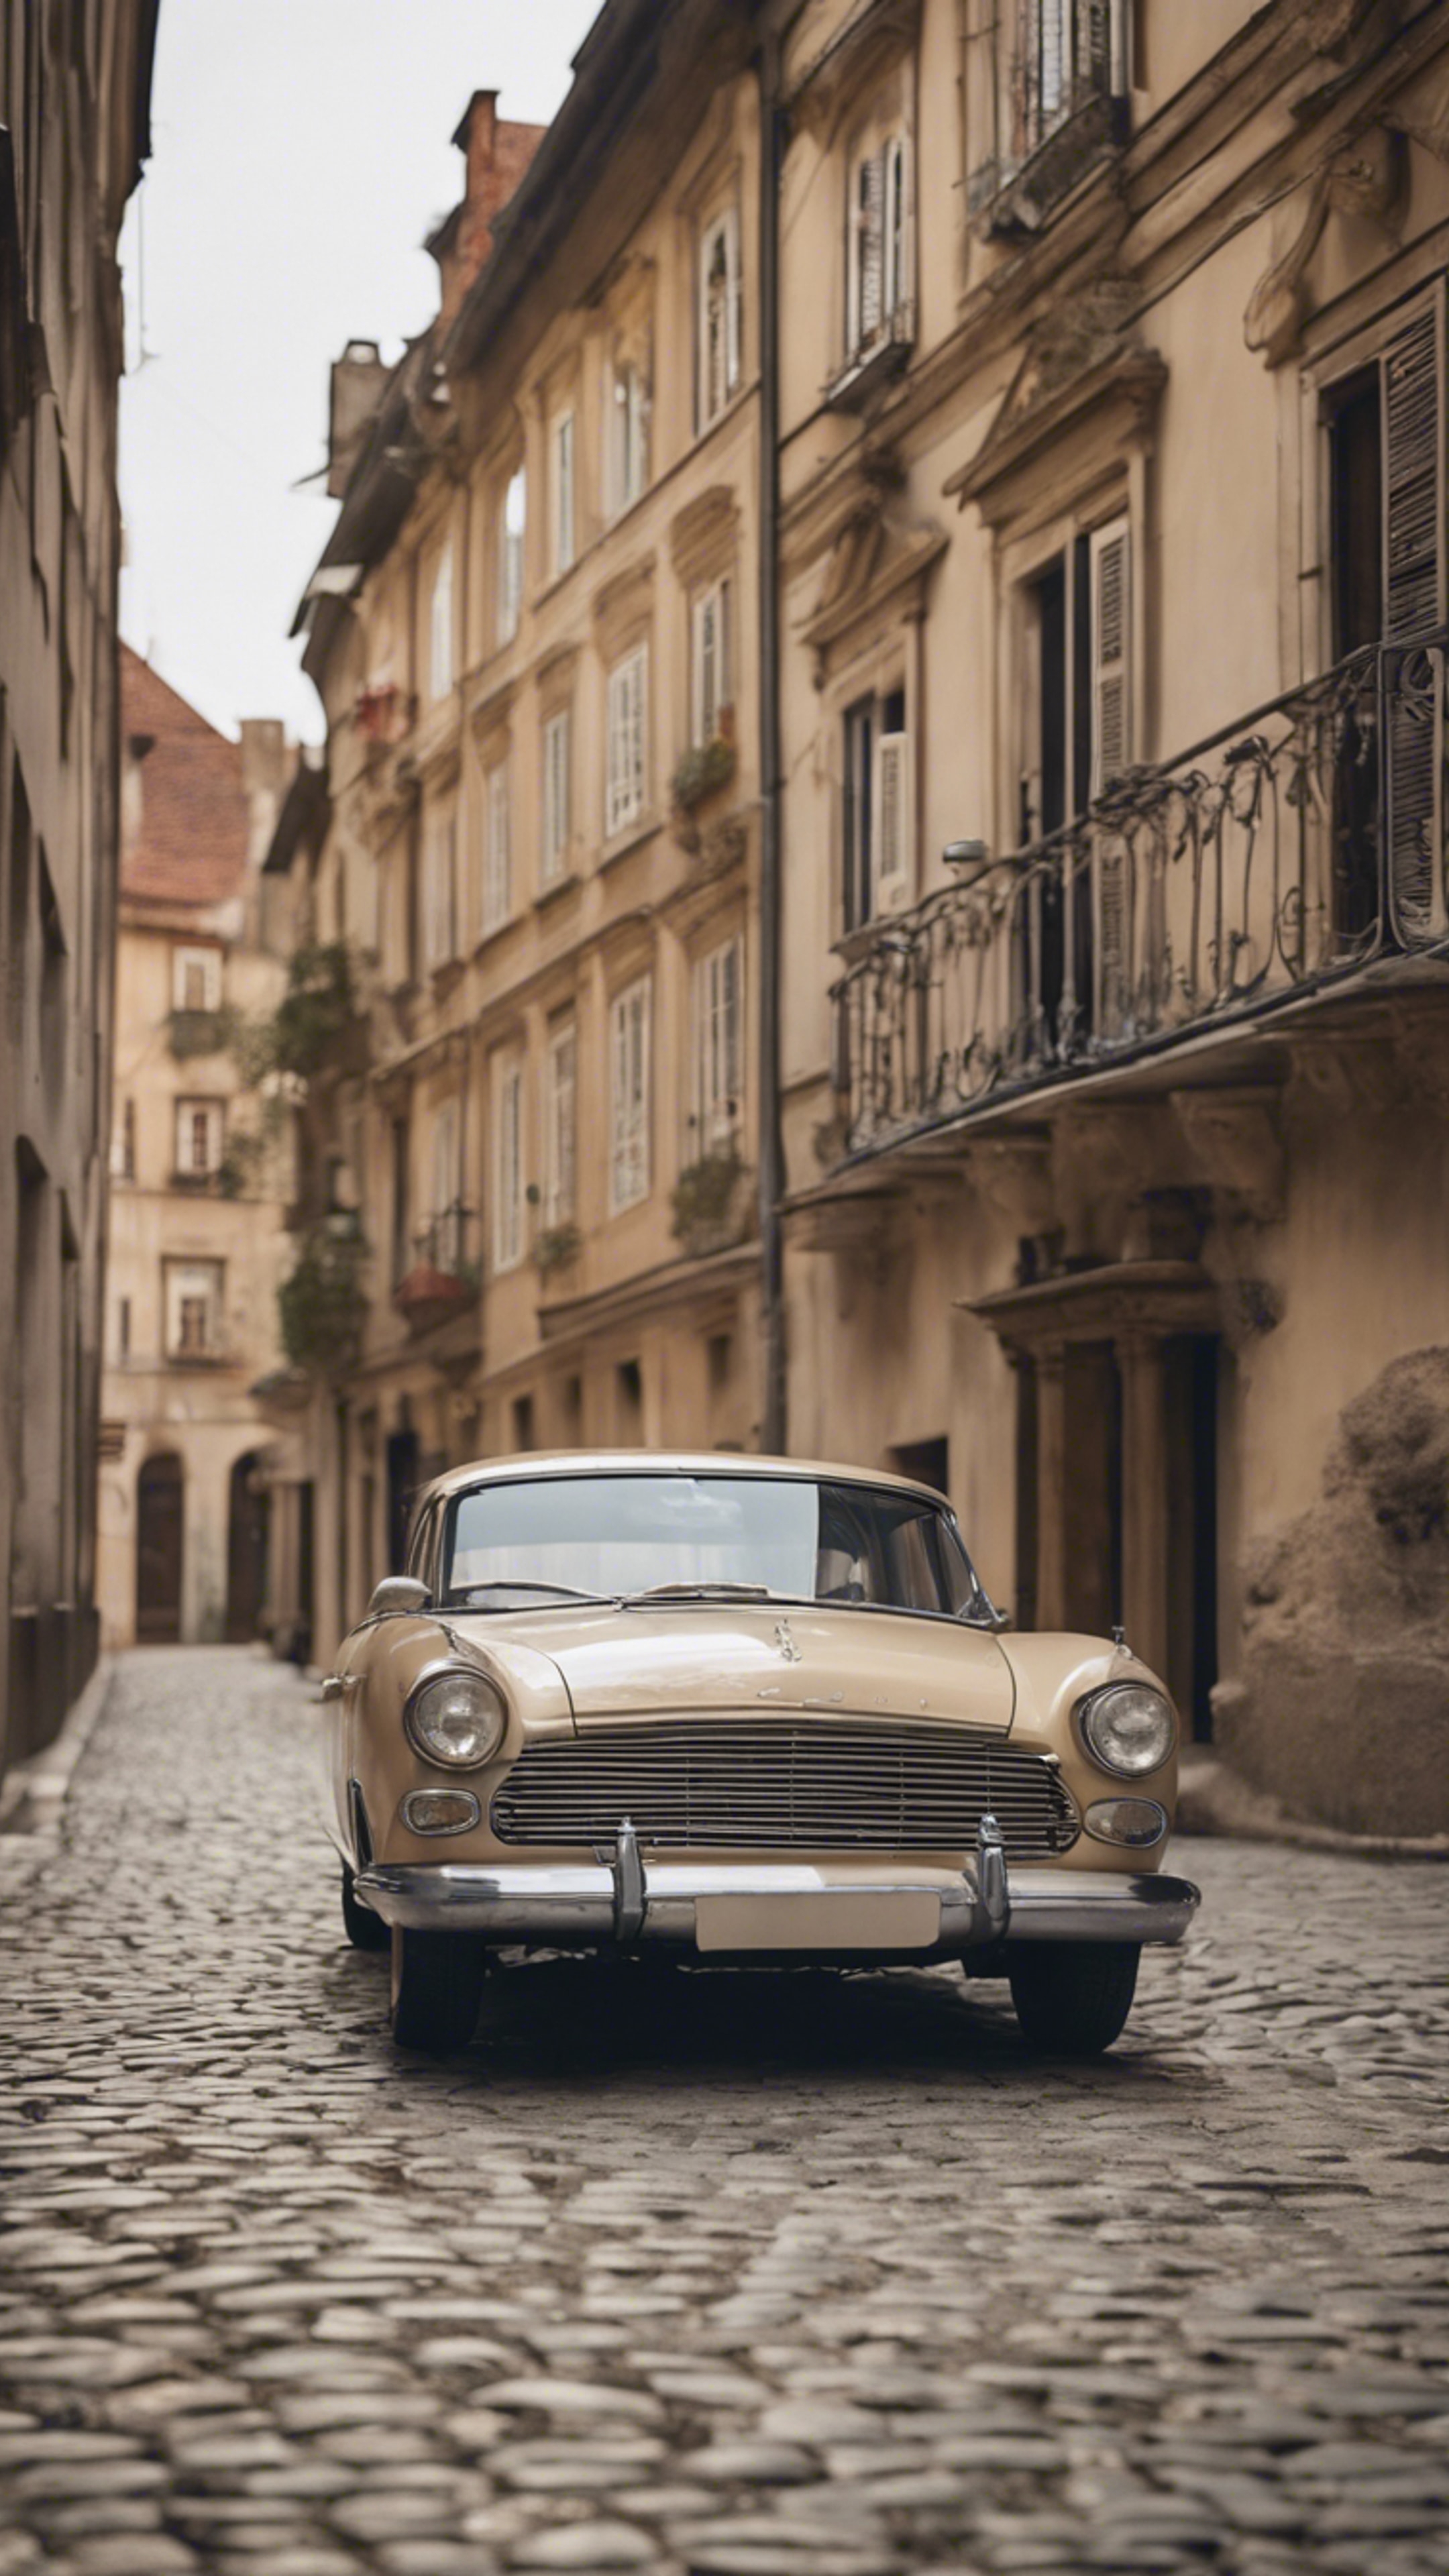 A beige classic car parked on a cobblestone street with rustic buildings in the background. Papel de parede[31a873a8b96b4be69c6a]